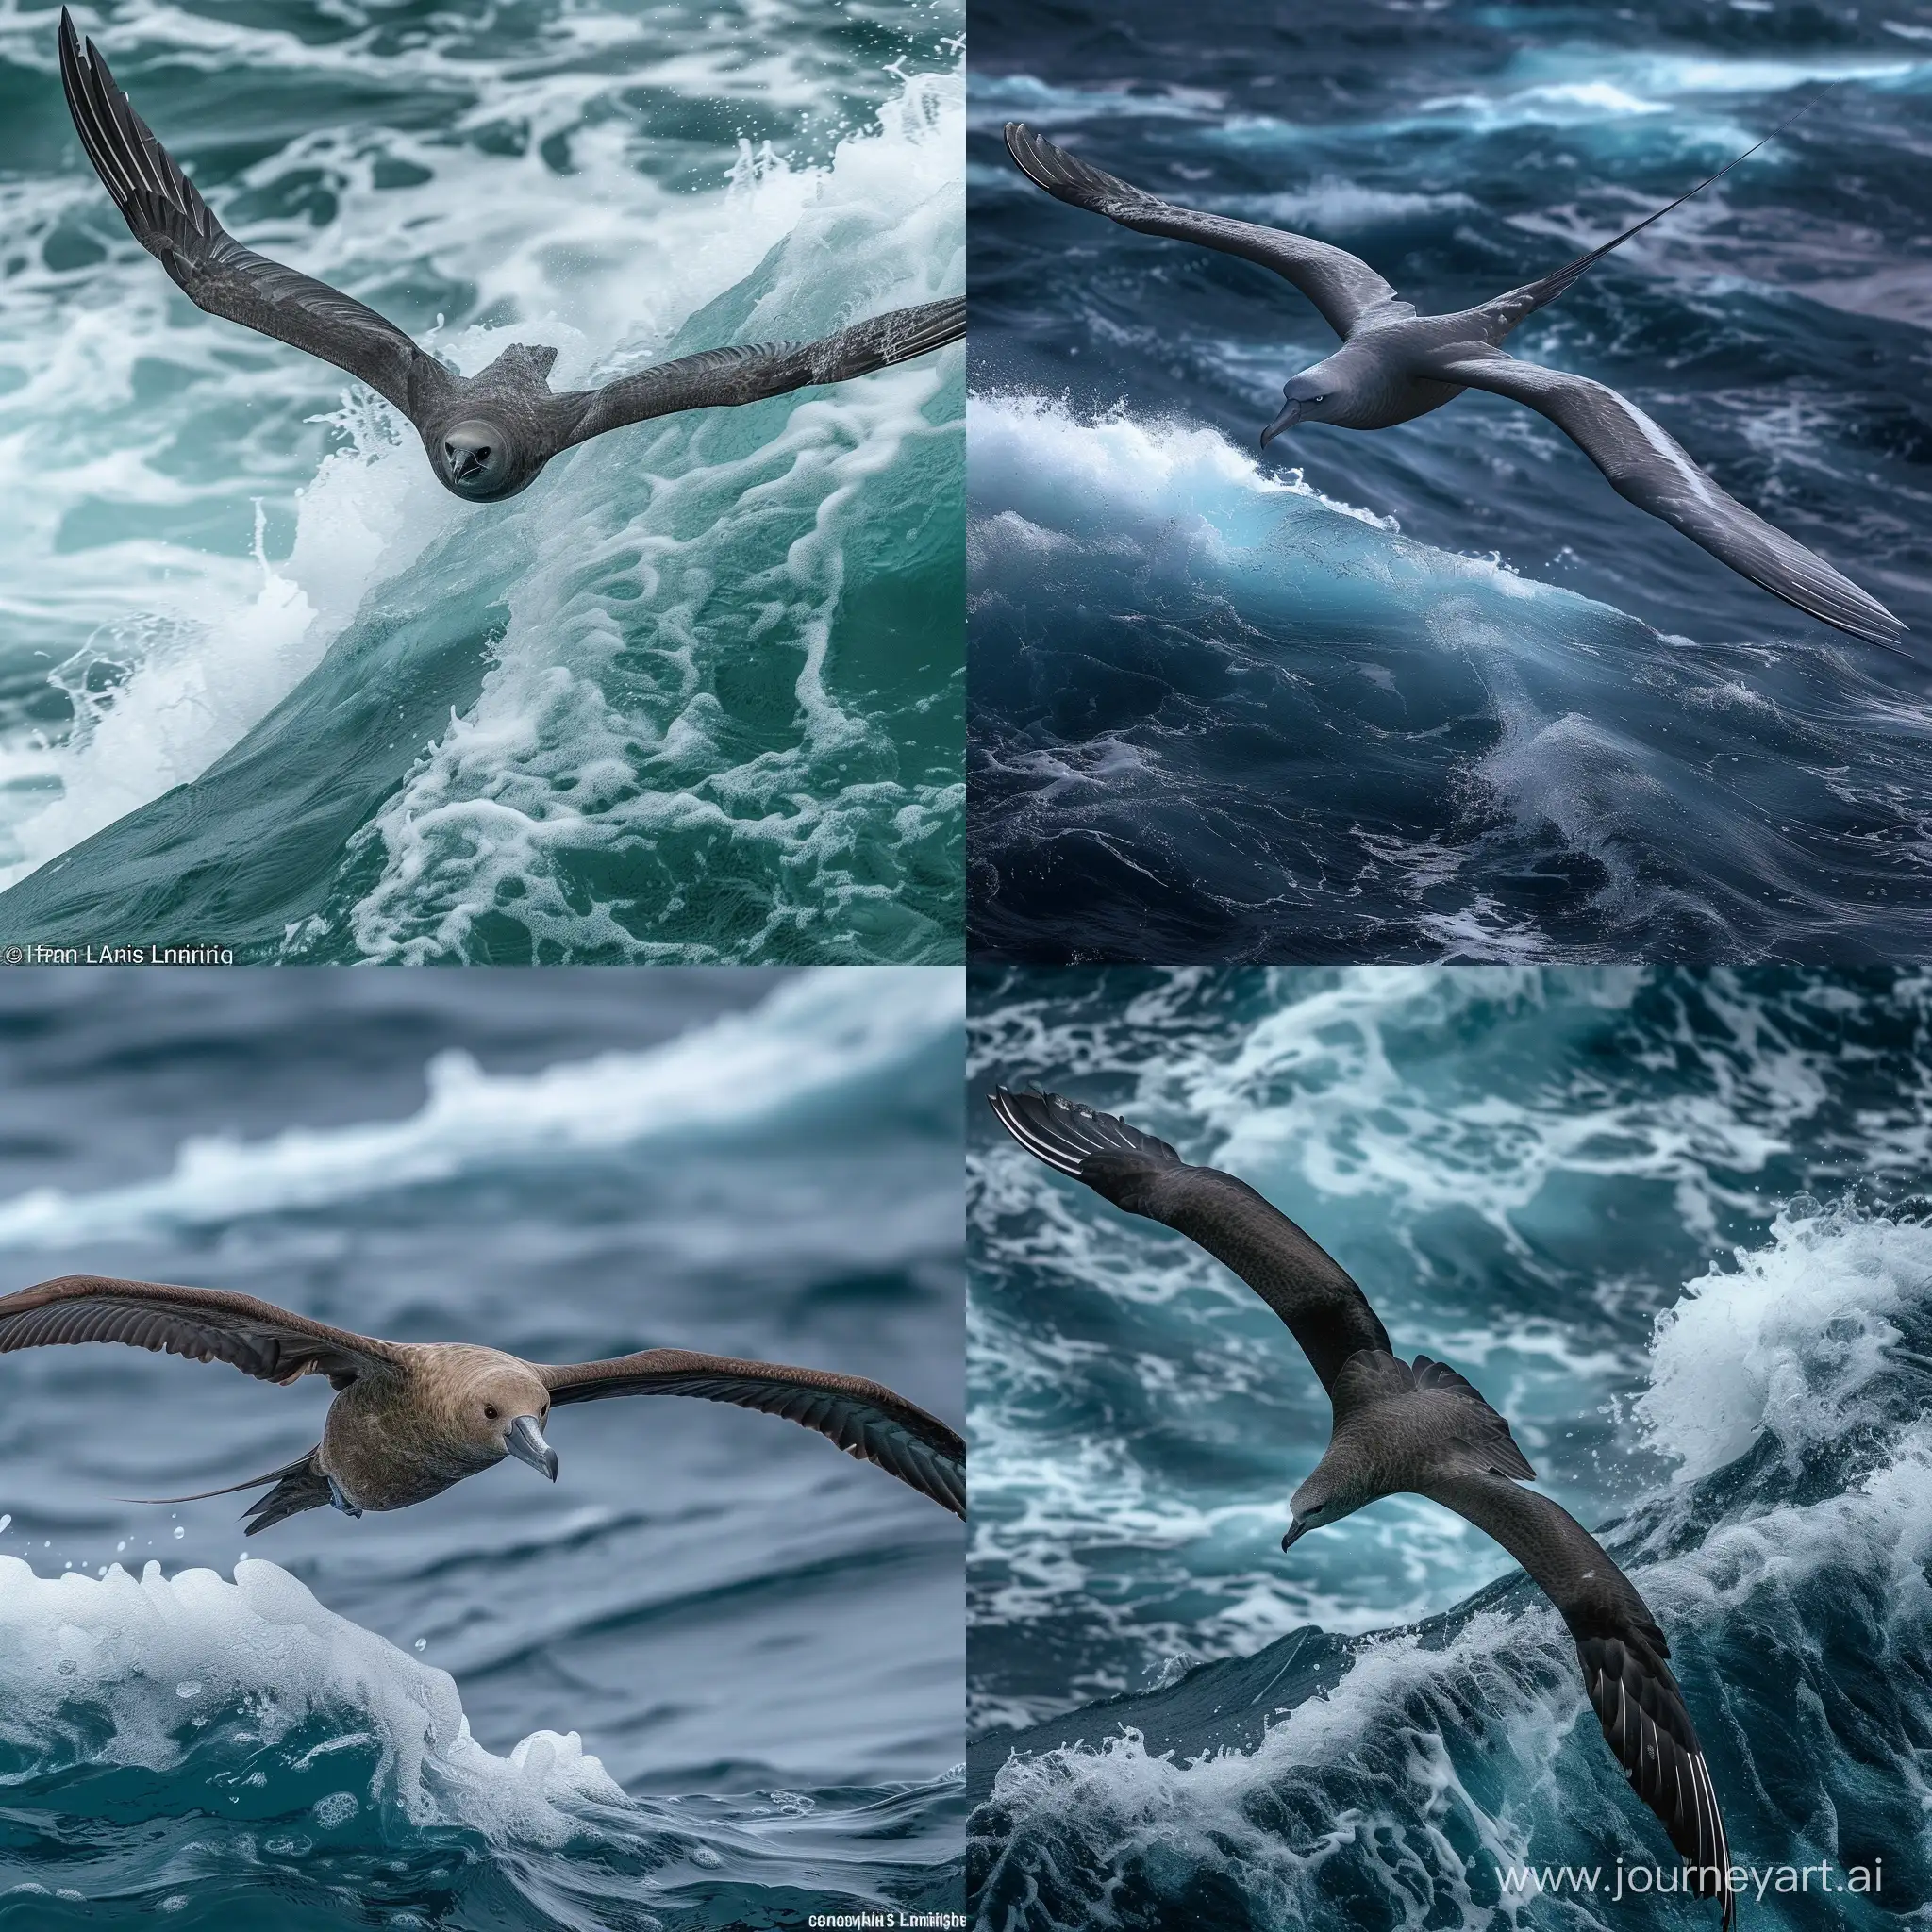 award winning wildlife photo of a new undiscovered seabird with a 15 foot wingspan and a 1 foot long body, gliding over ocean waves, canon camera, supertelephoto lens, dramatic, crisp, Frans Lanting, nature documentary, entire bird in frame, ridiculous wingspan proportion, insanely long wingspan, super tiny body with meter long wings, mostly just wings on a tiny body